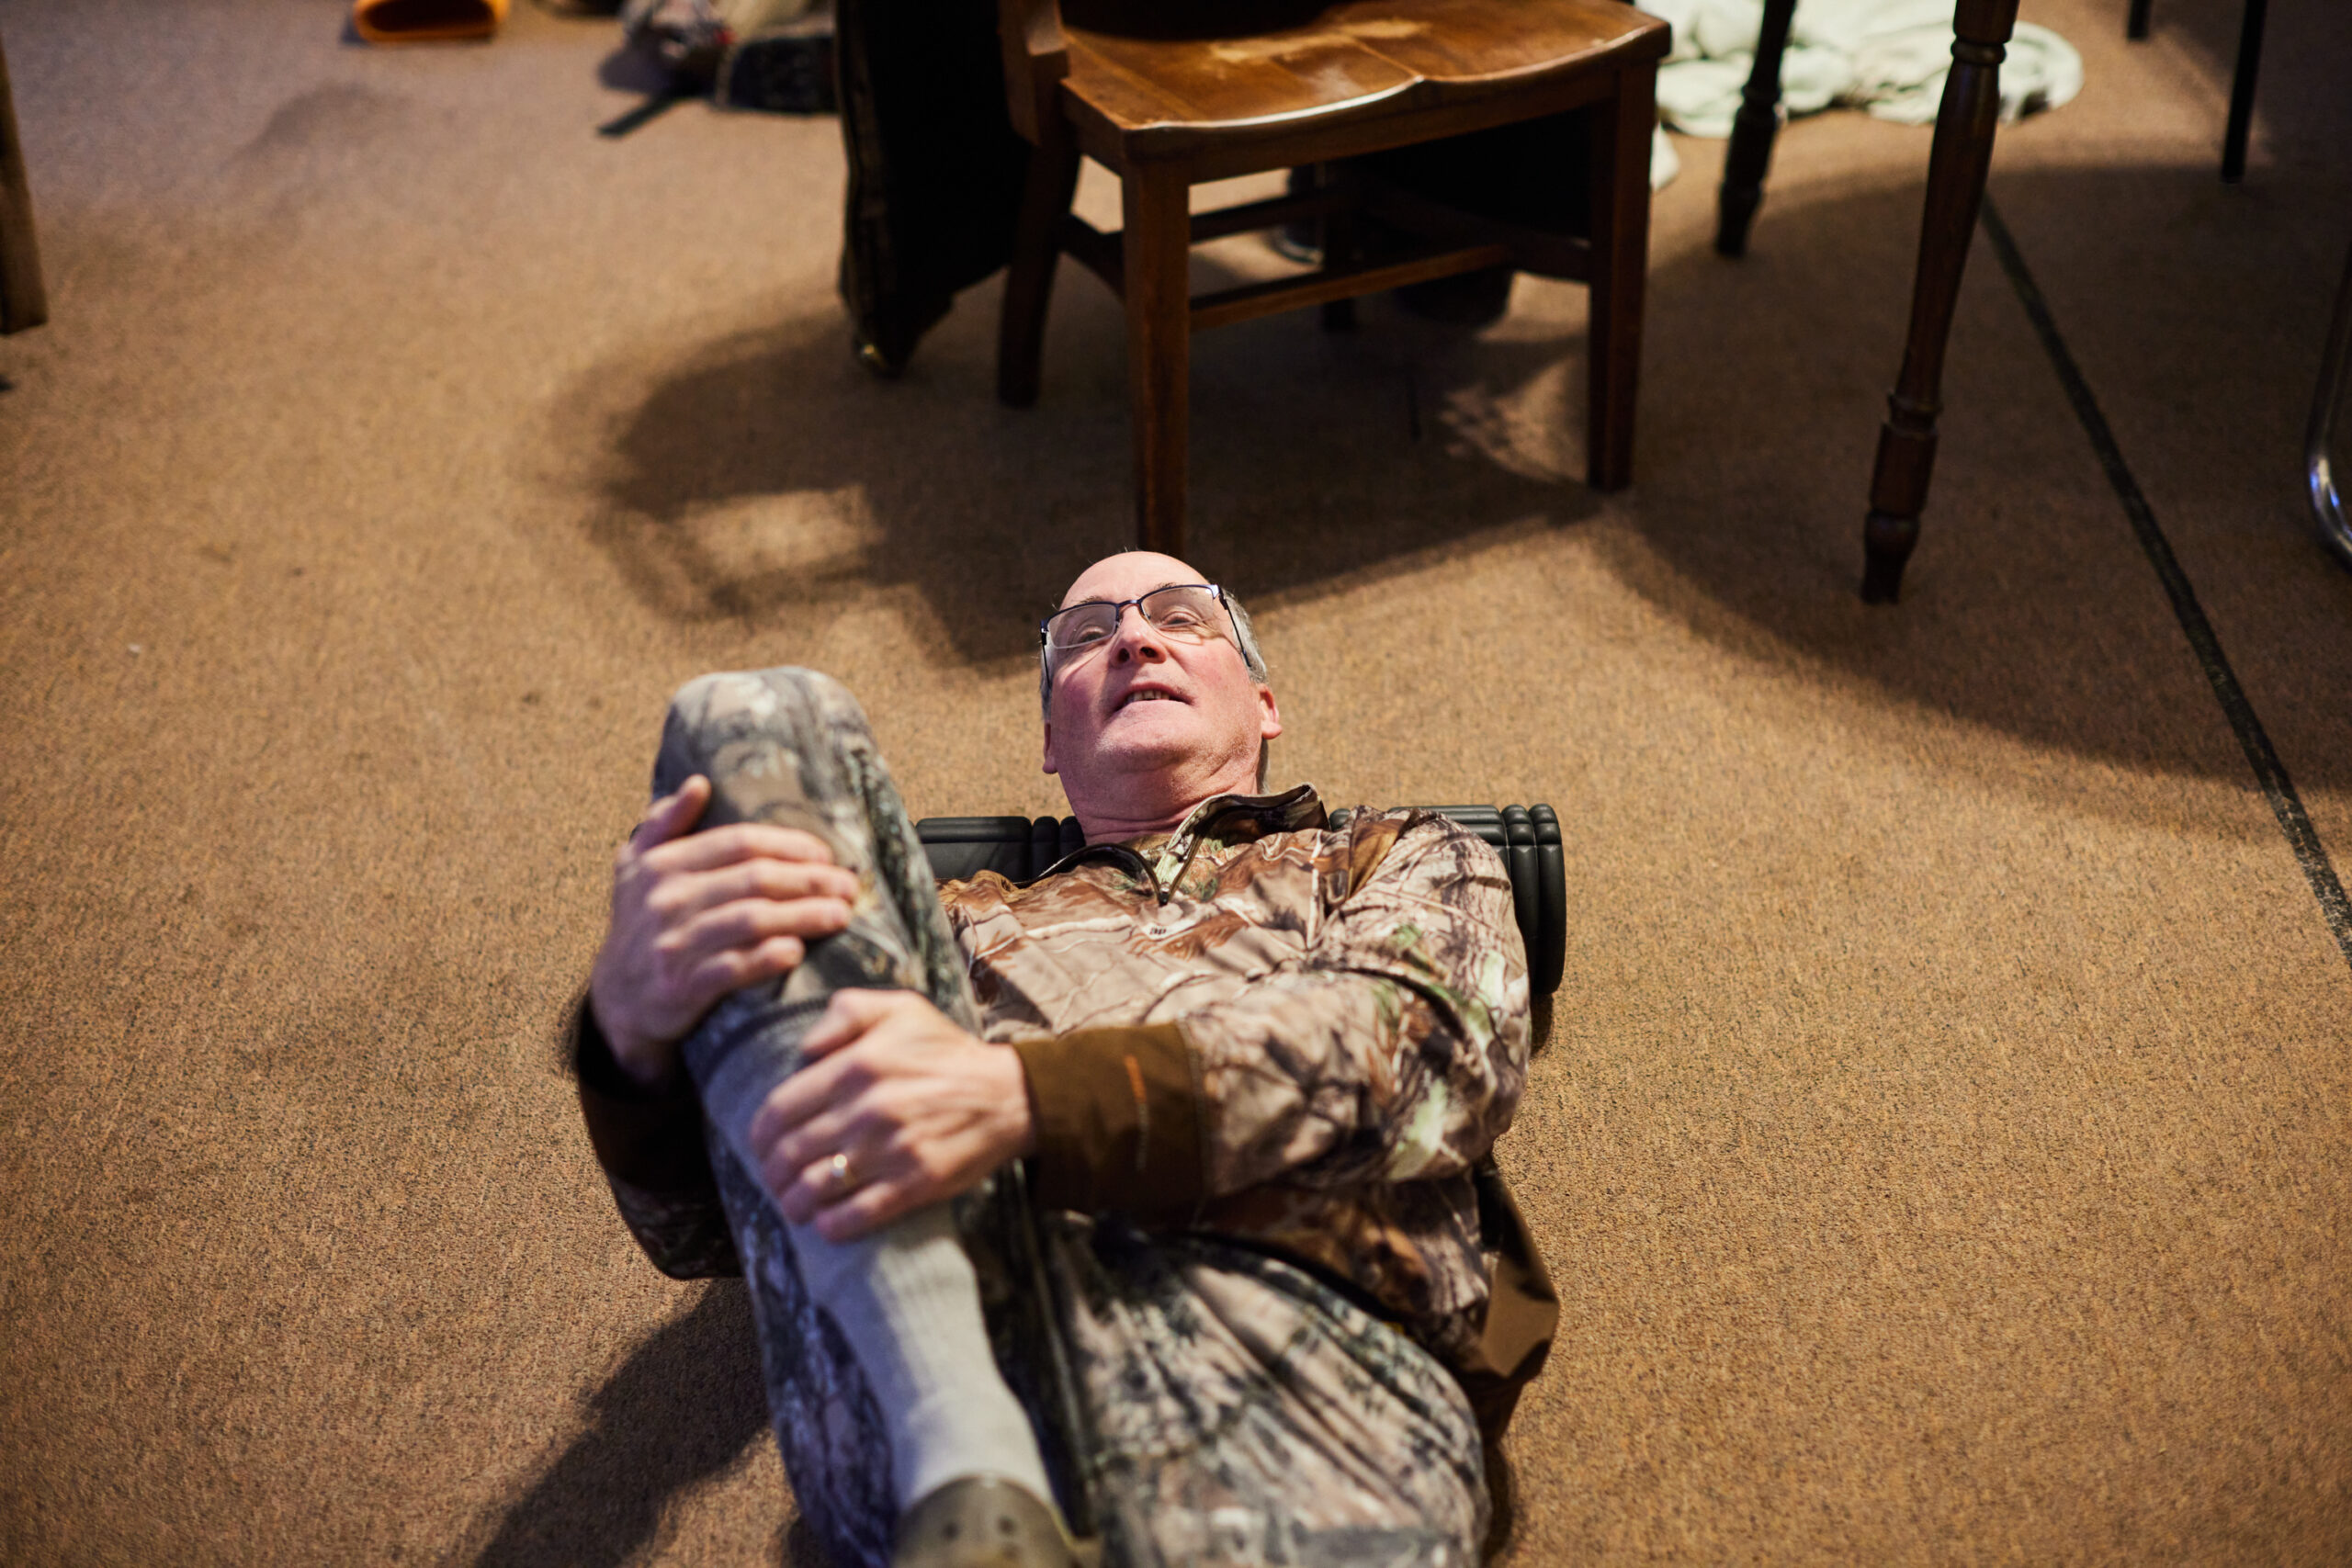 A hunter stretches on the floor